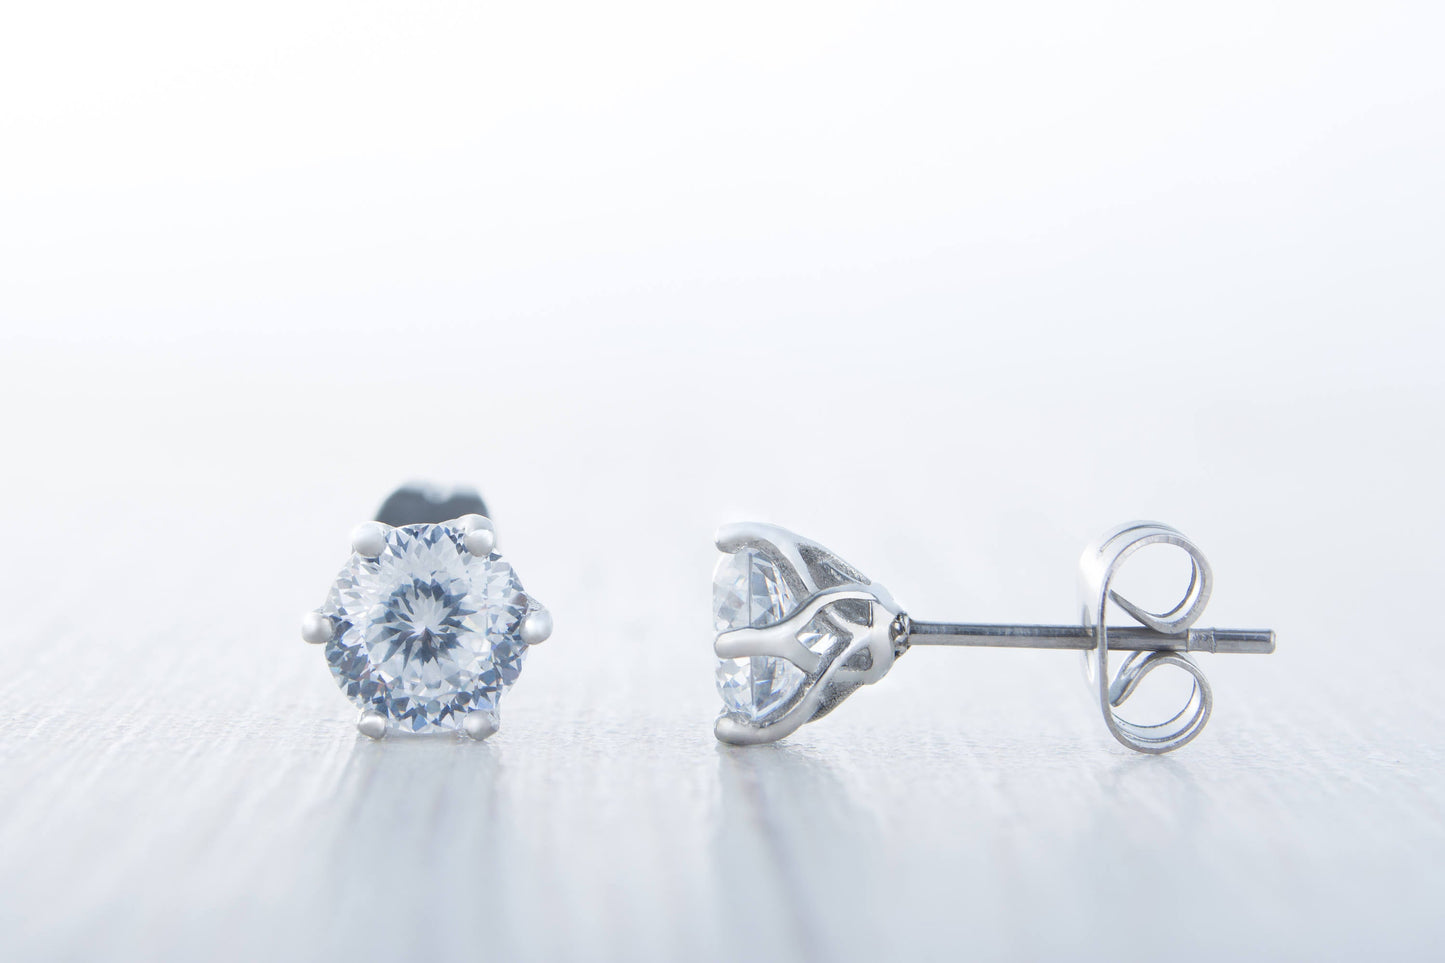 Portuguese Cut Man Made Diamond Simulant stud earrings, available in titanium, white gold and surgical steel 5mm or 6mm sizes